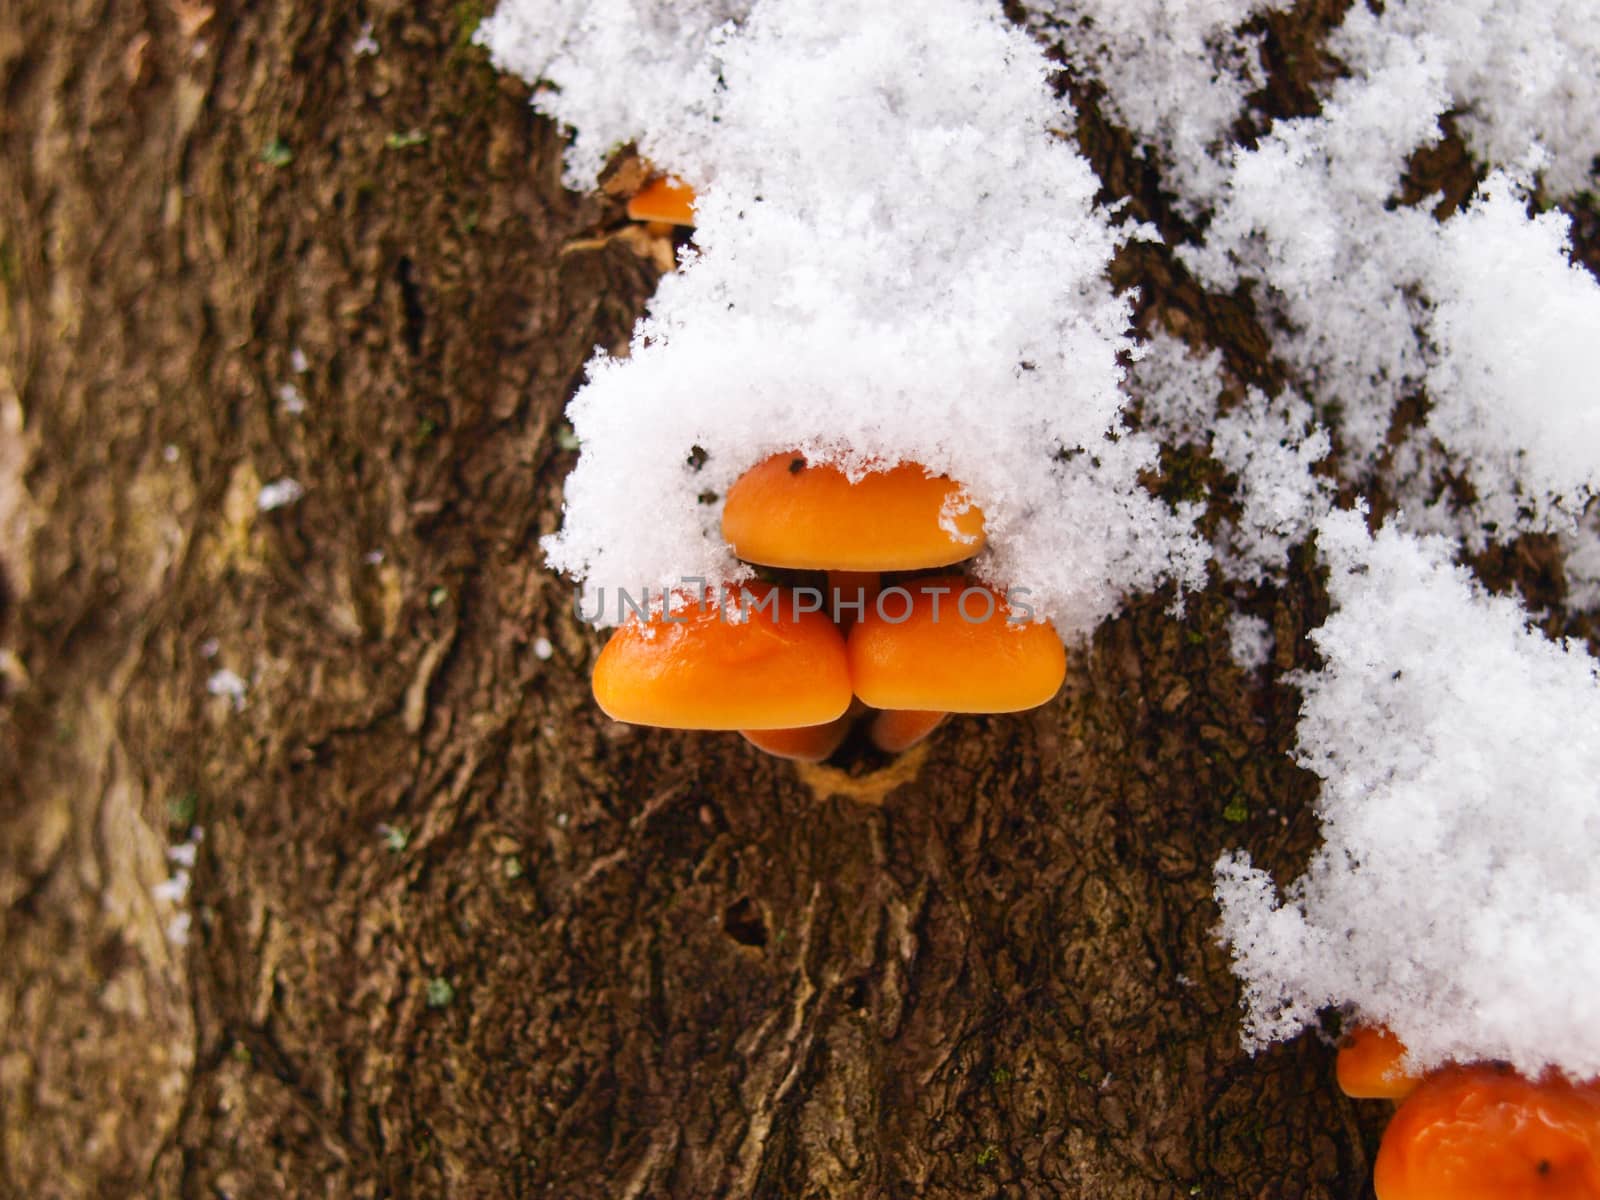 Snowy enokitake mushroom on the tree trunk in forest at winter. Edible mushroom variety. Ingredient for soups and various dishes. Latin name Flammulina velutipes.